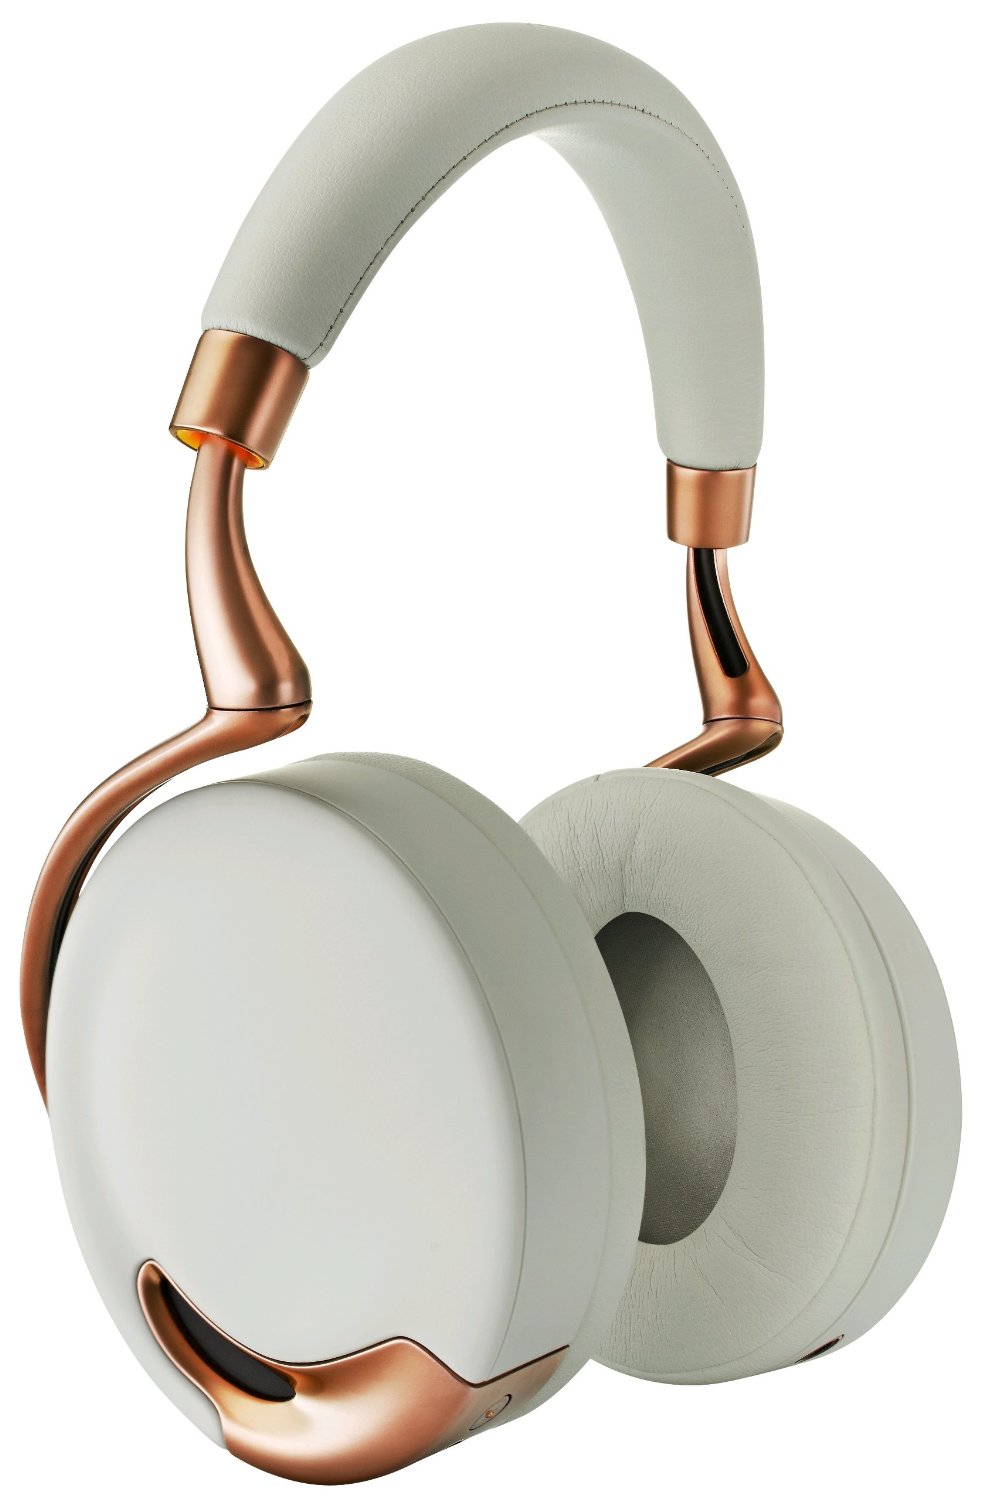 Parrot Zik Wireless Noise Cancelling Headphones with Touch Control – Rose Gold